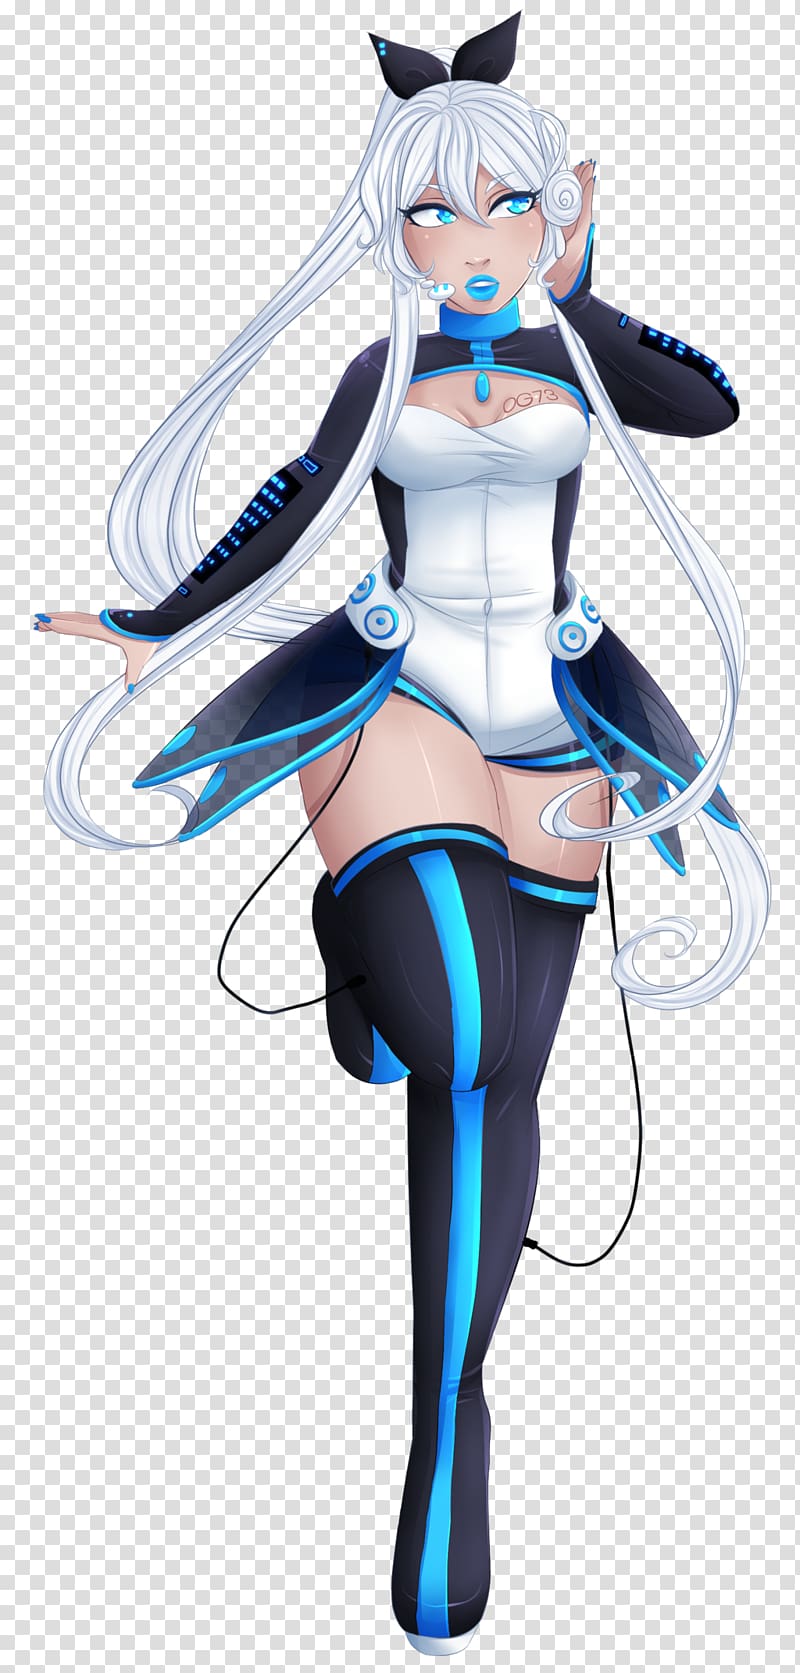 Utau Vocaloid Computer Software NIAONiao Virtual Singer Human voice, others transparent background PNG clipart